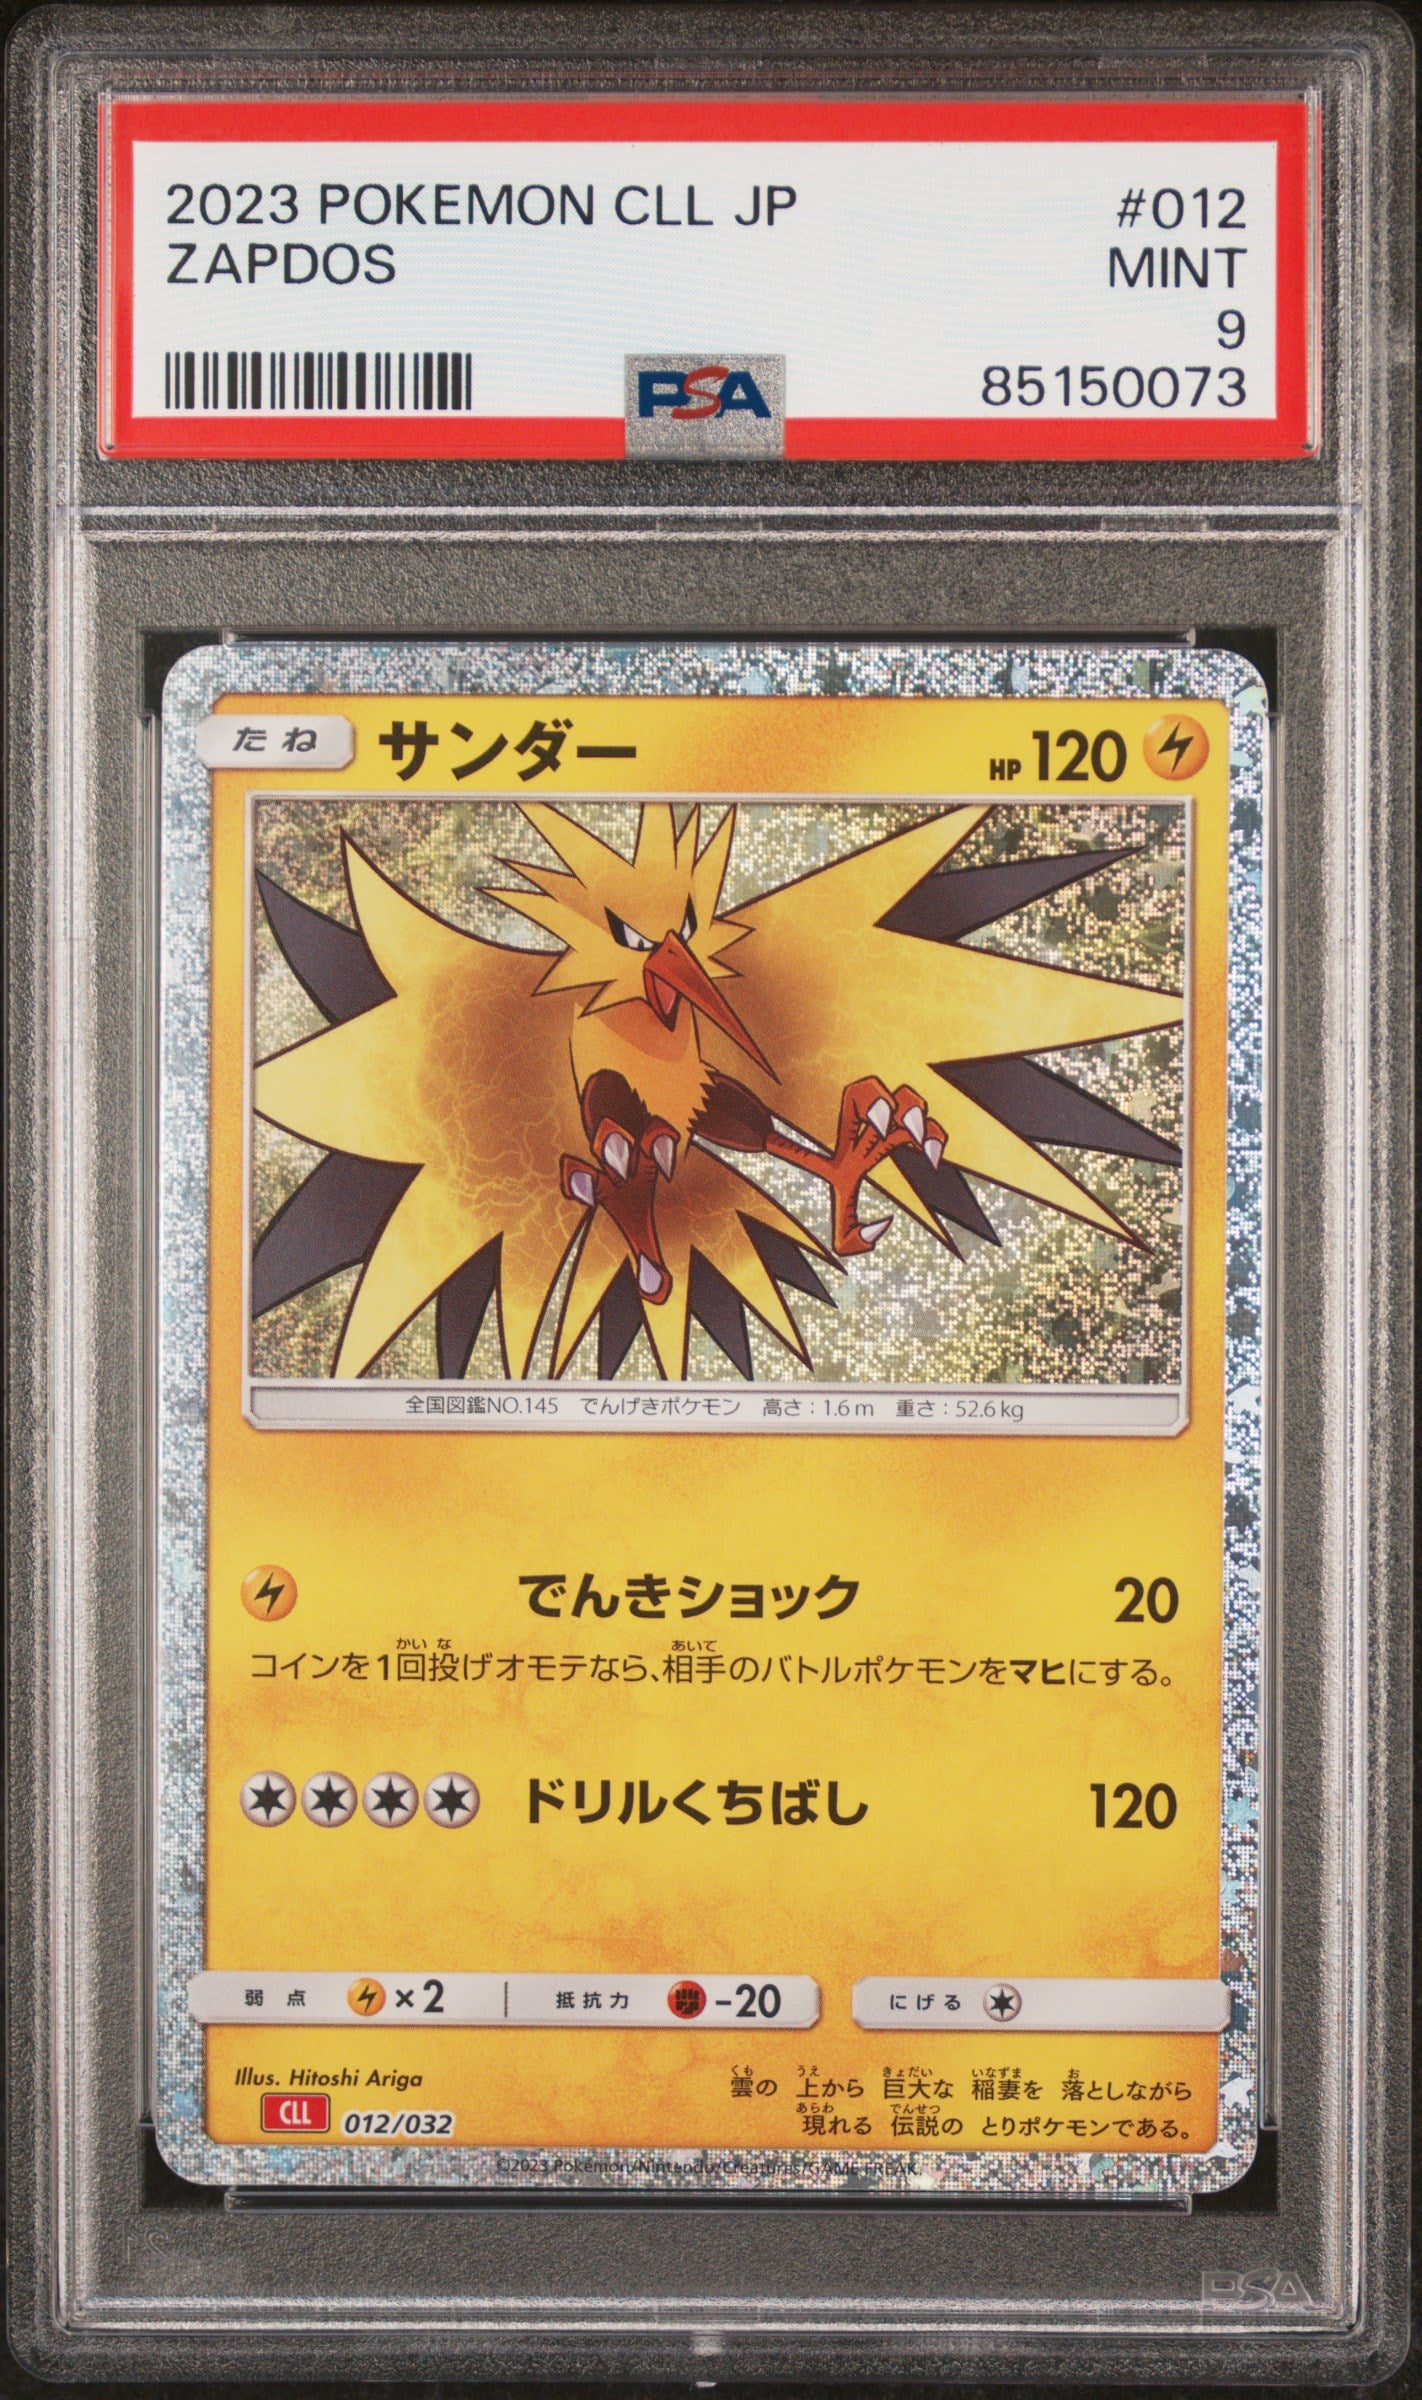 ZAPDOS 012 PSA 9 POKEMON JAPANESE CLL-TRADING CARD GAME CLASSIC CHARIZARD & HO-OH ex DECK